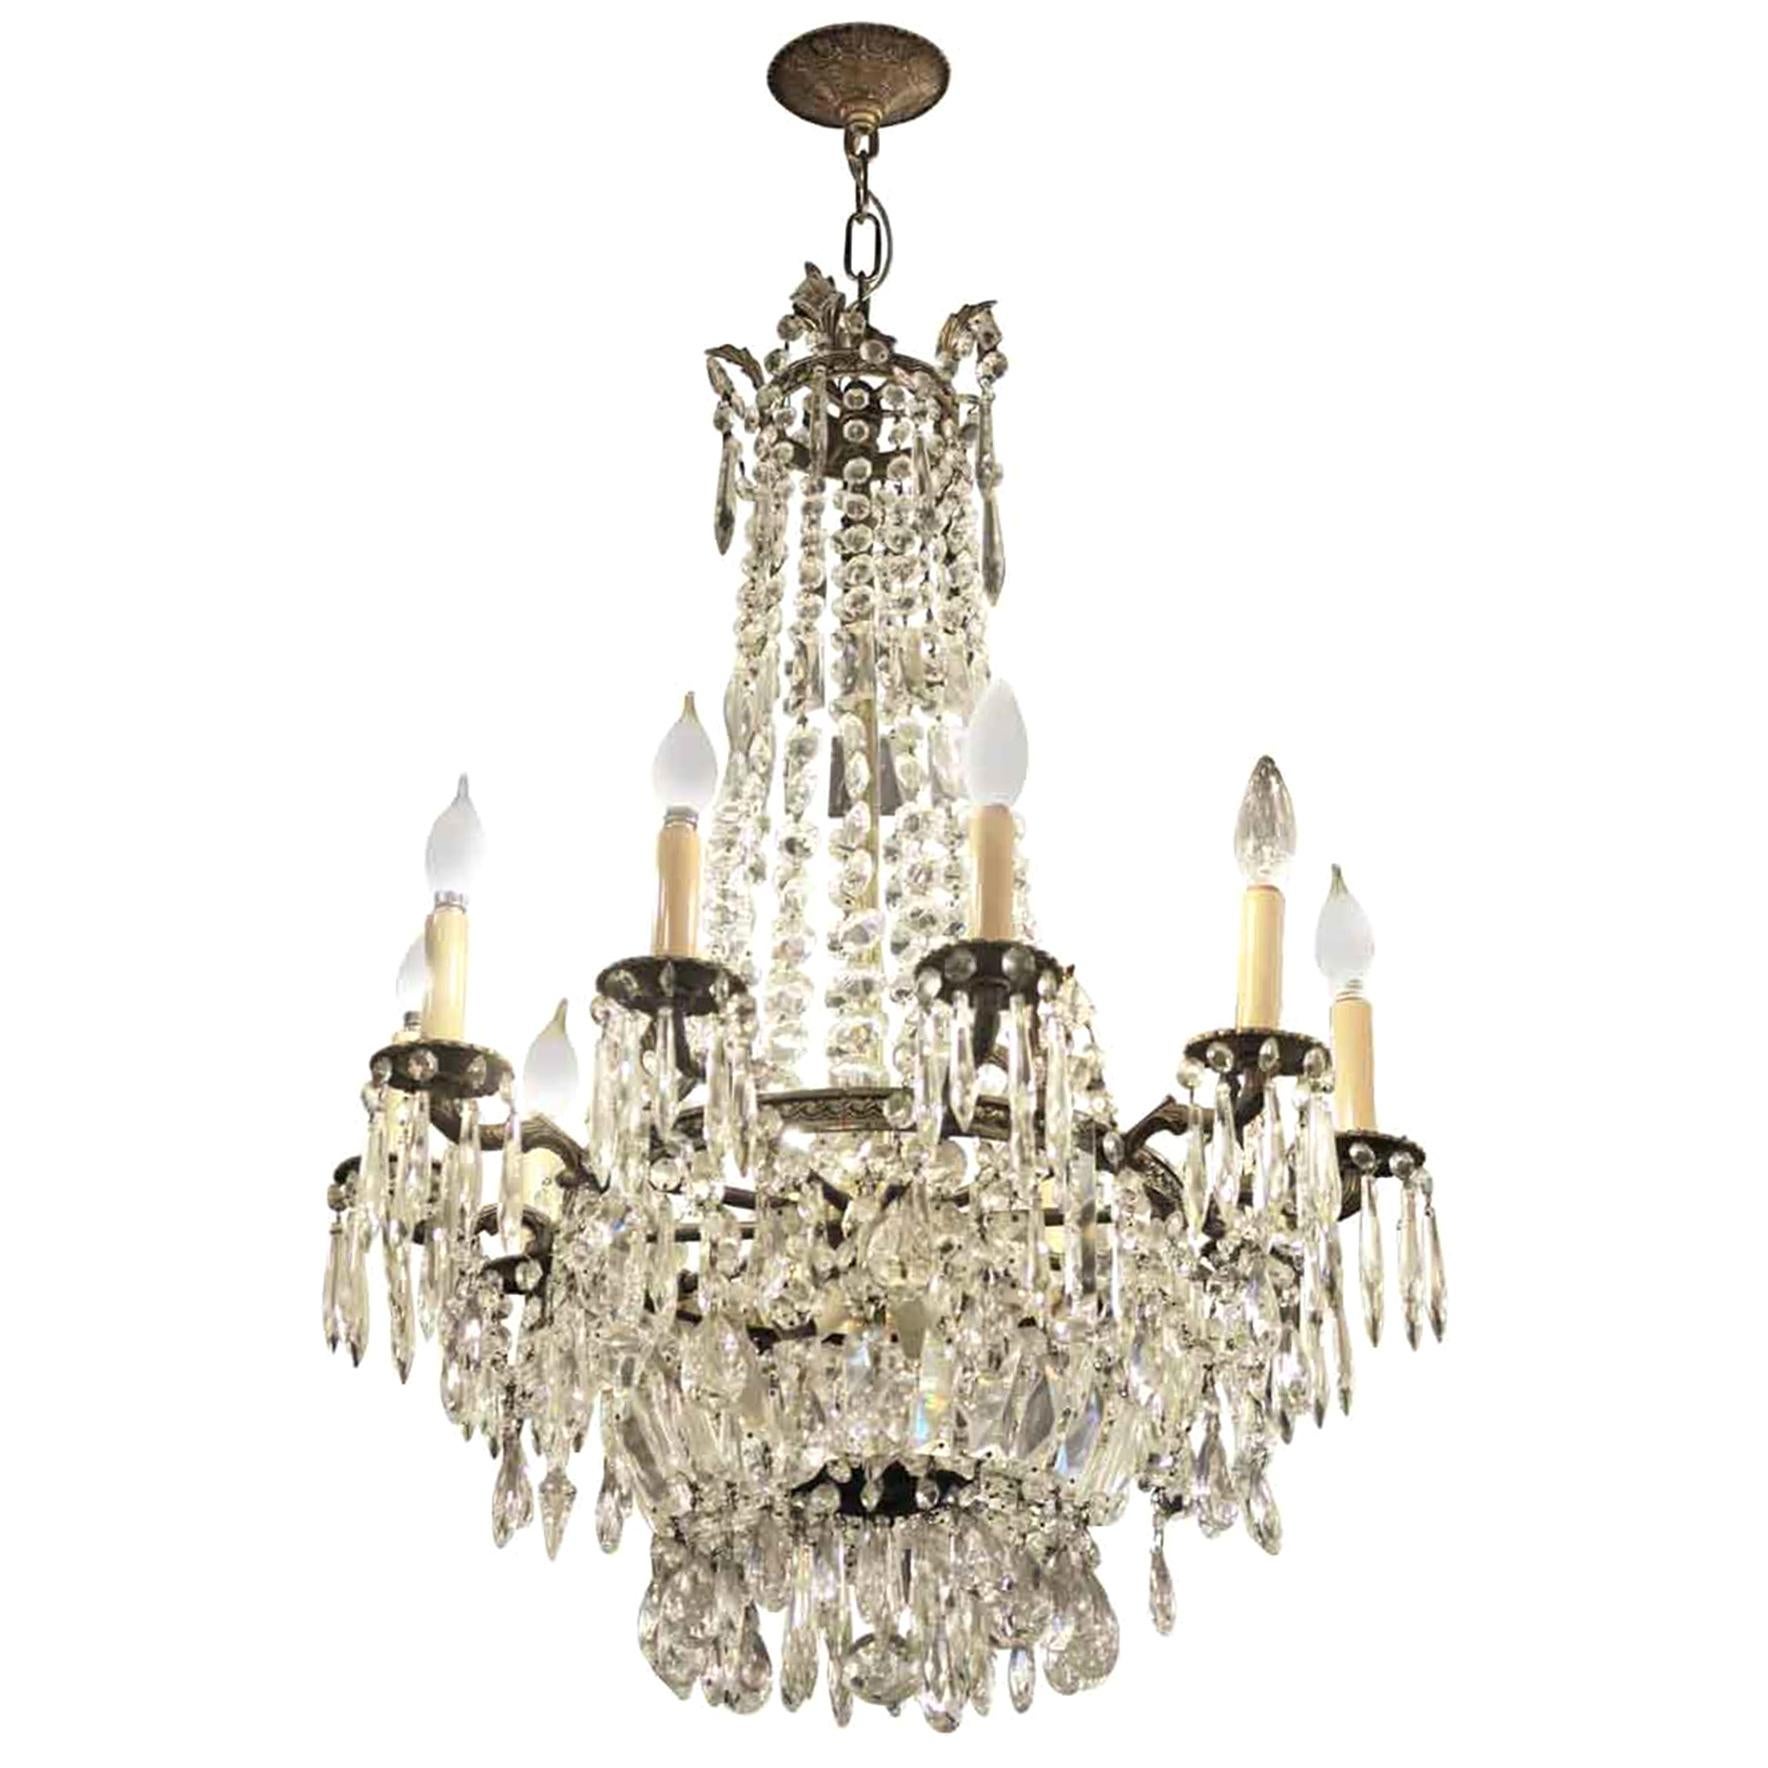 1920s Large-Scale Ten-Arm Crystal Chandelier